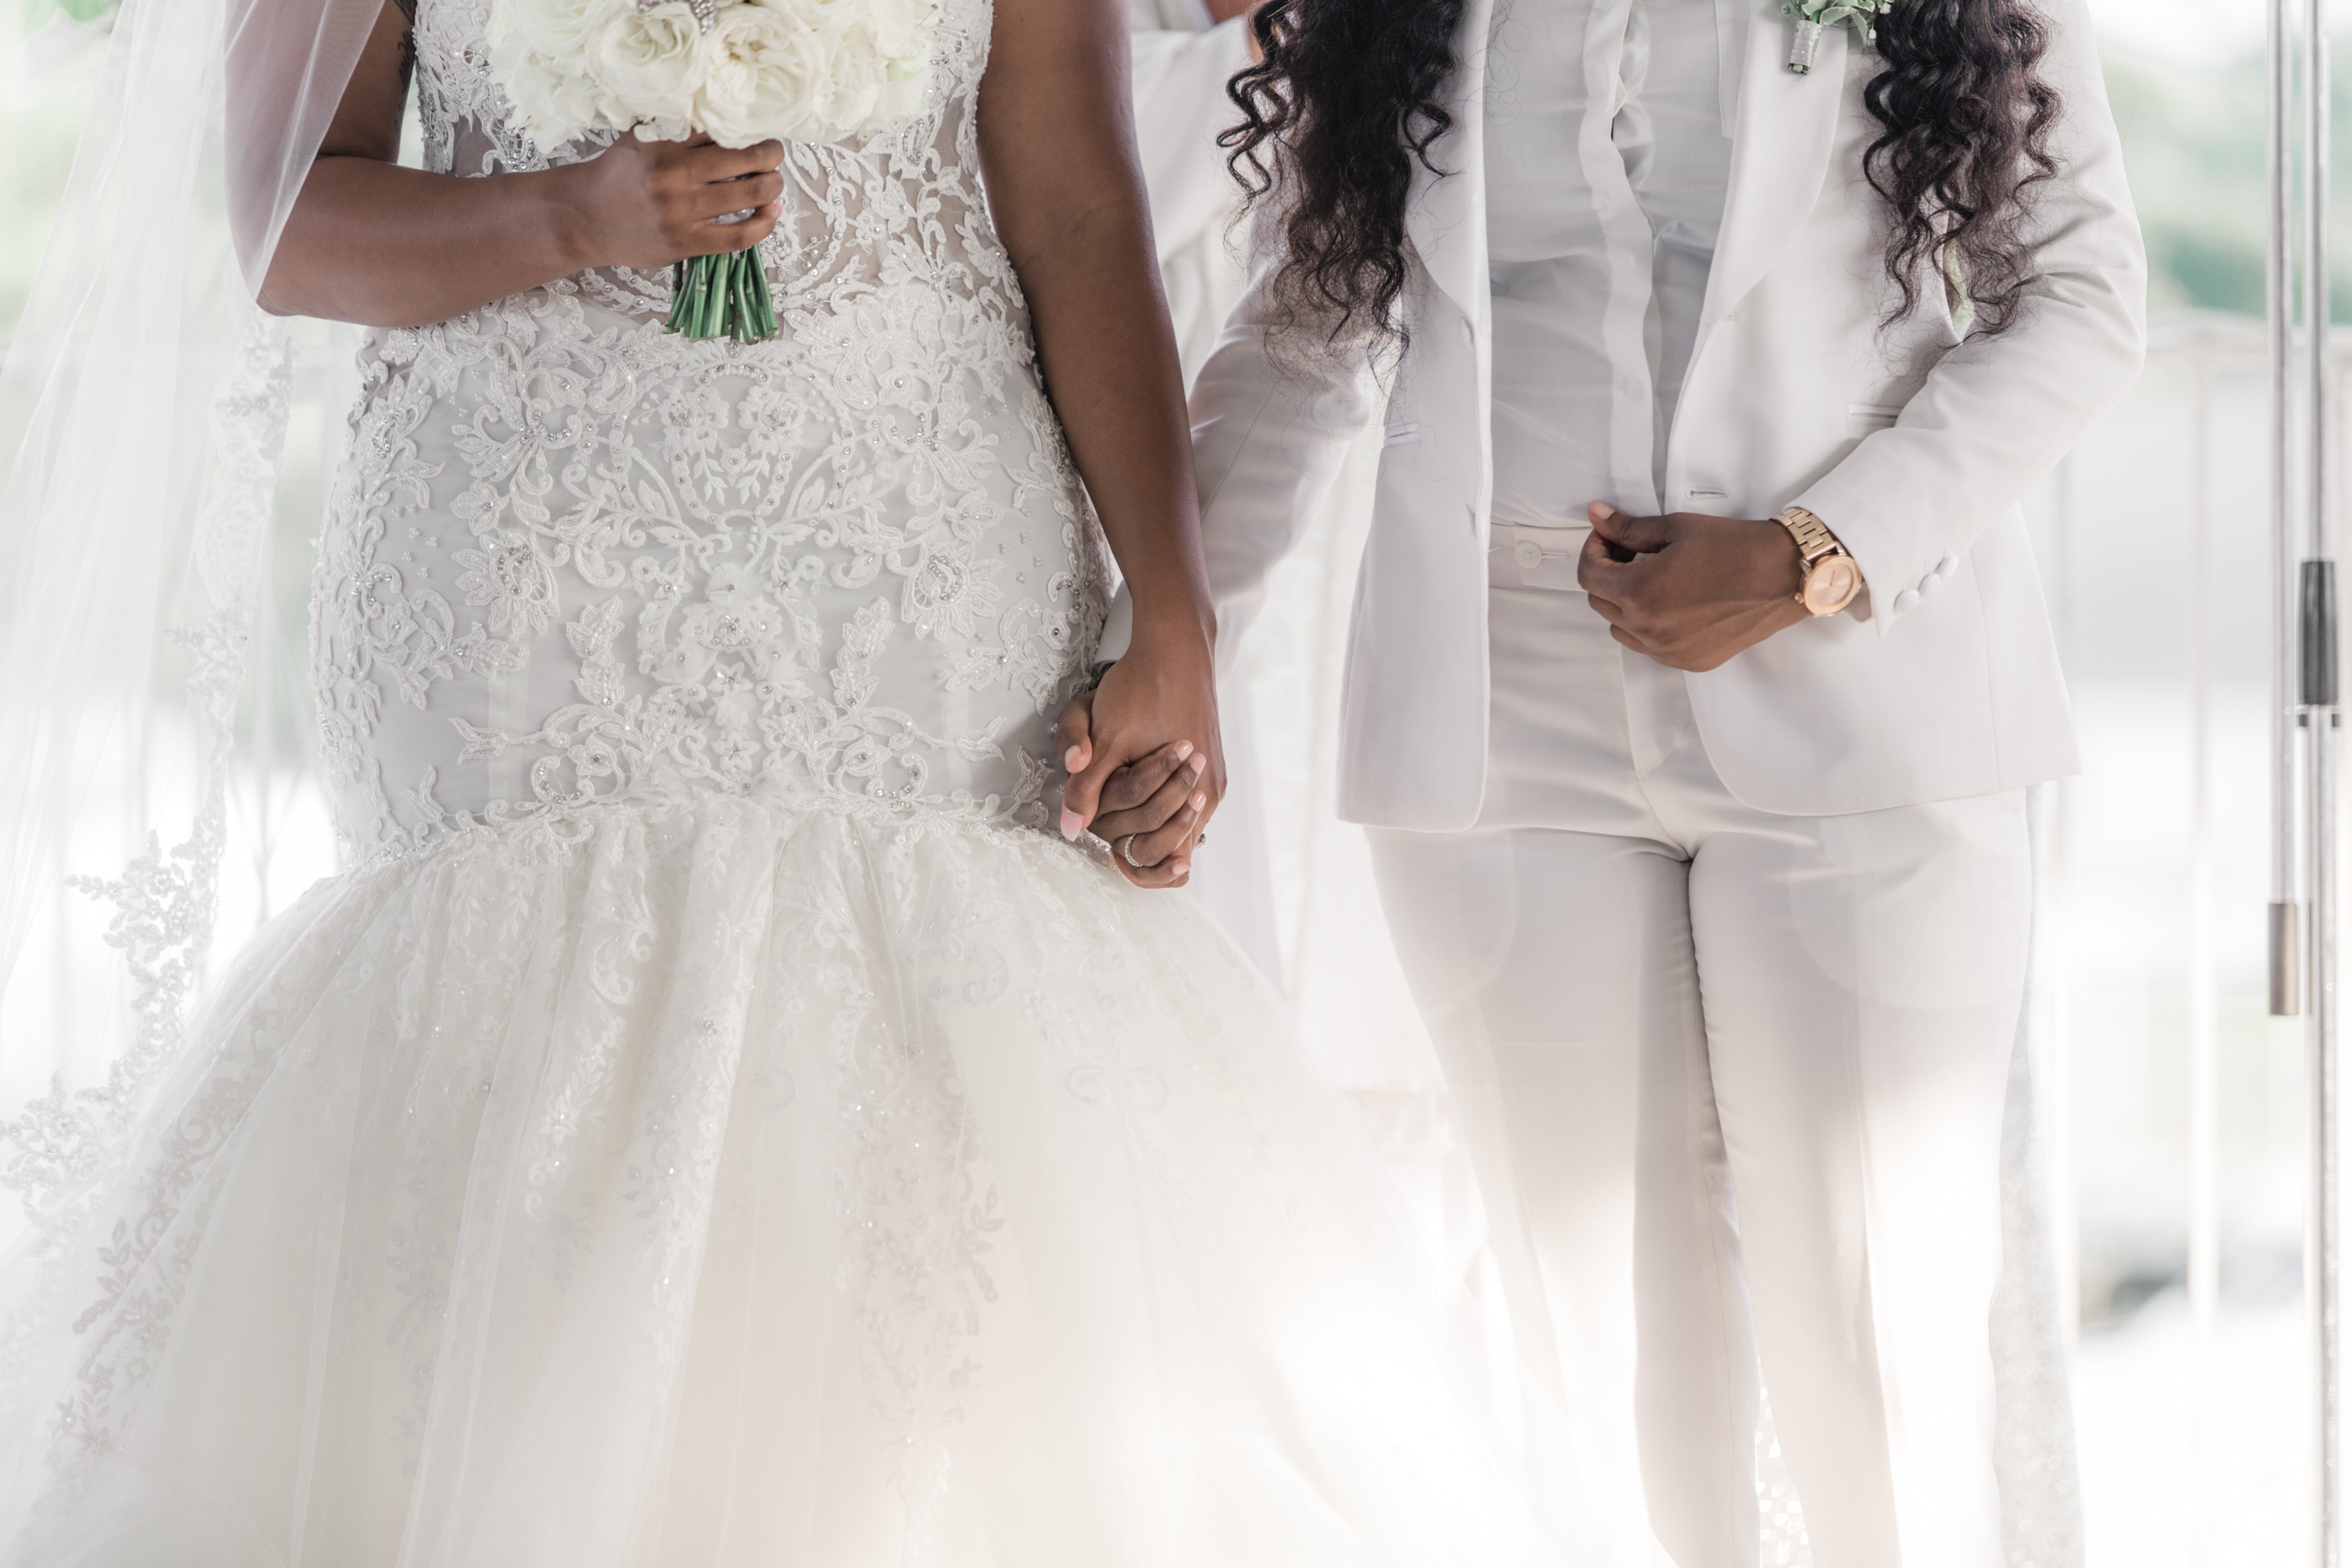 Bridal Bliss: Chantel And Shavonia’s Love Shined Through Their Stunning Wedding Photos